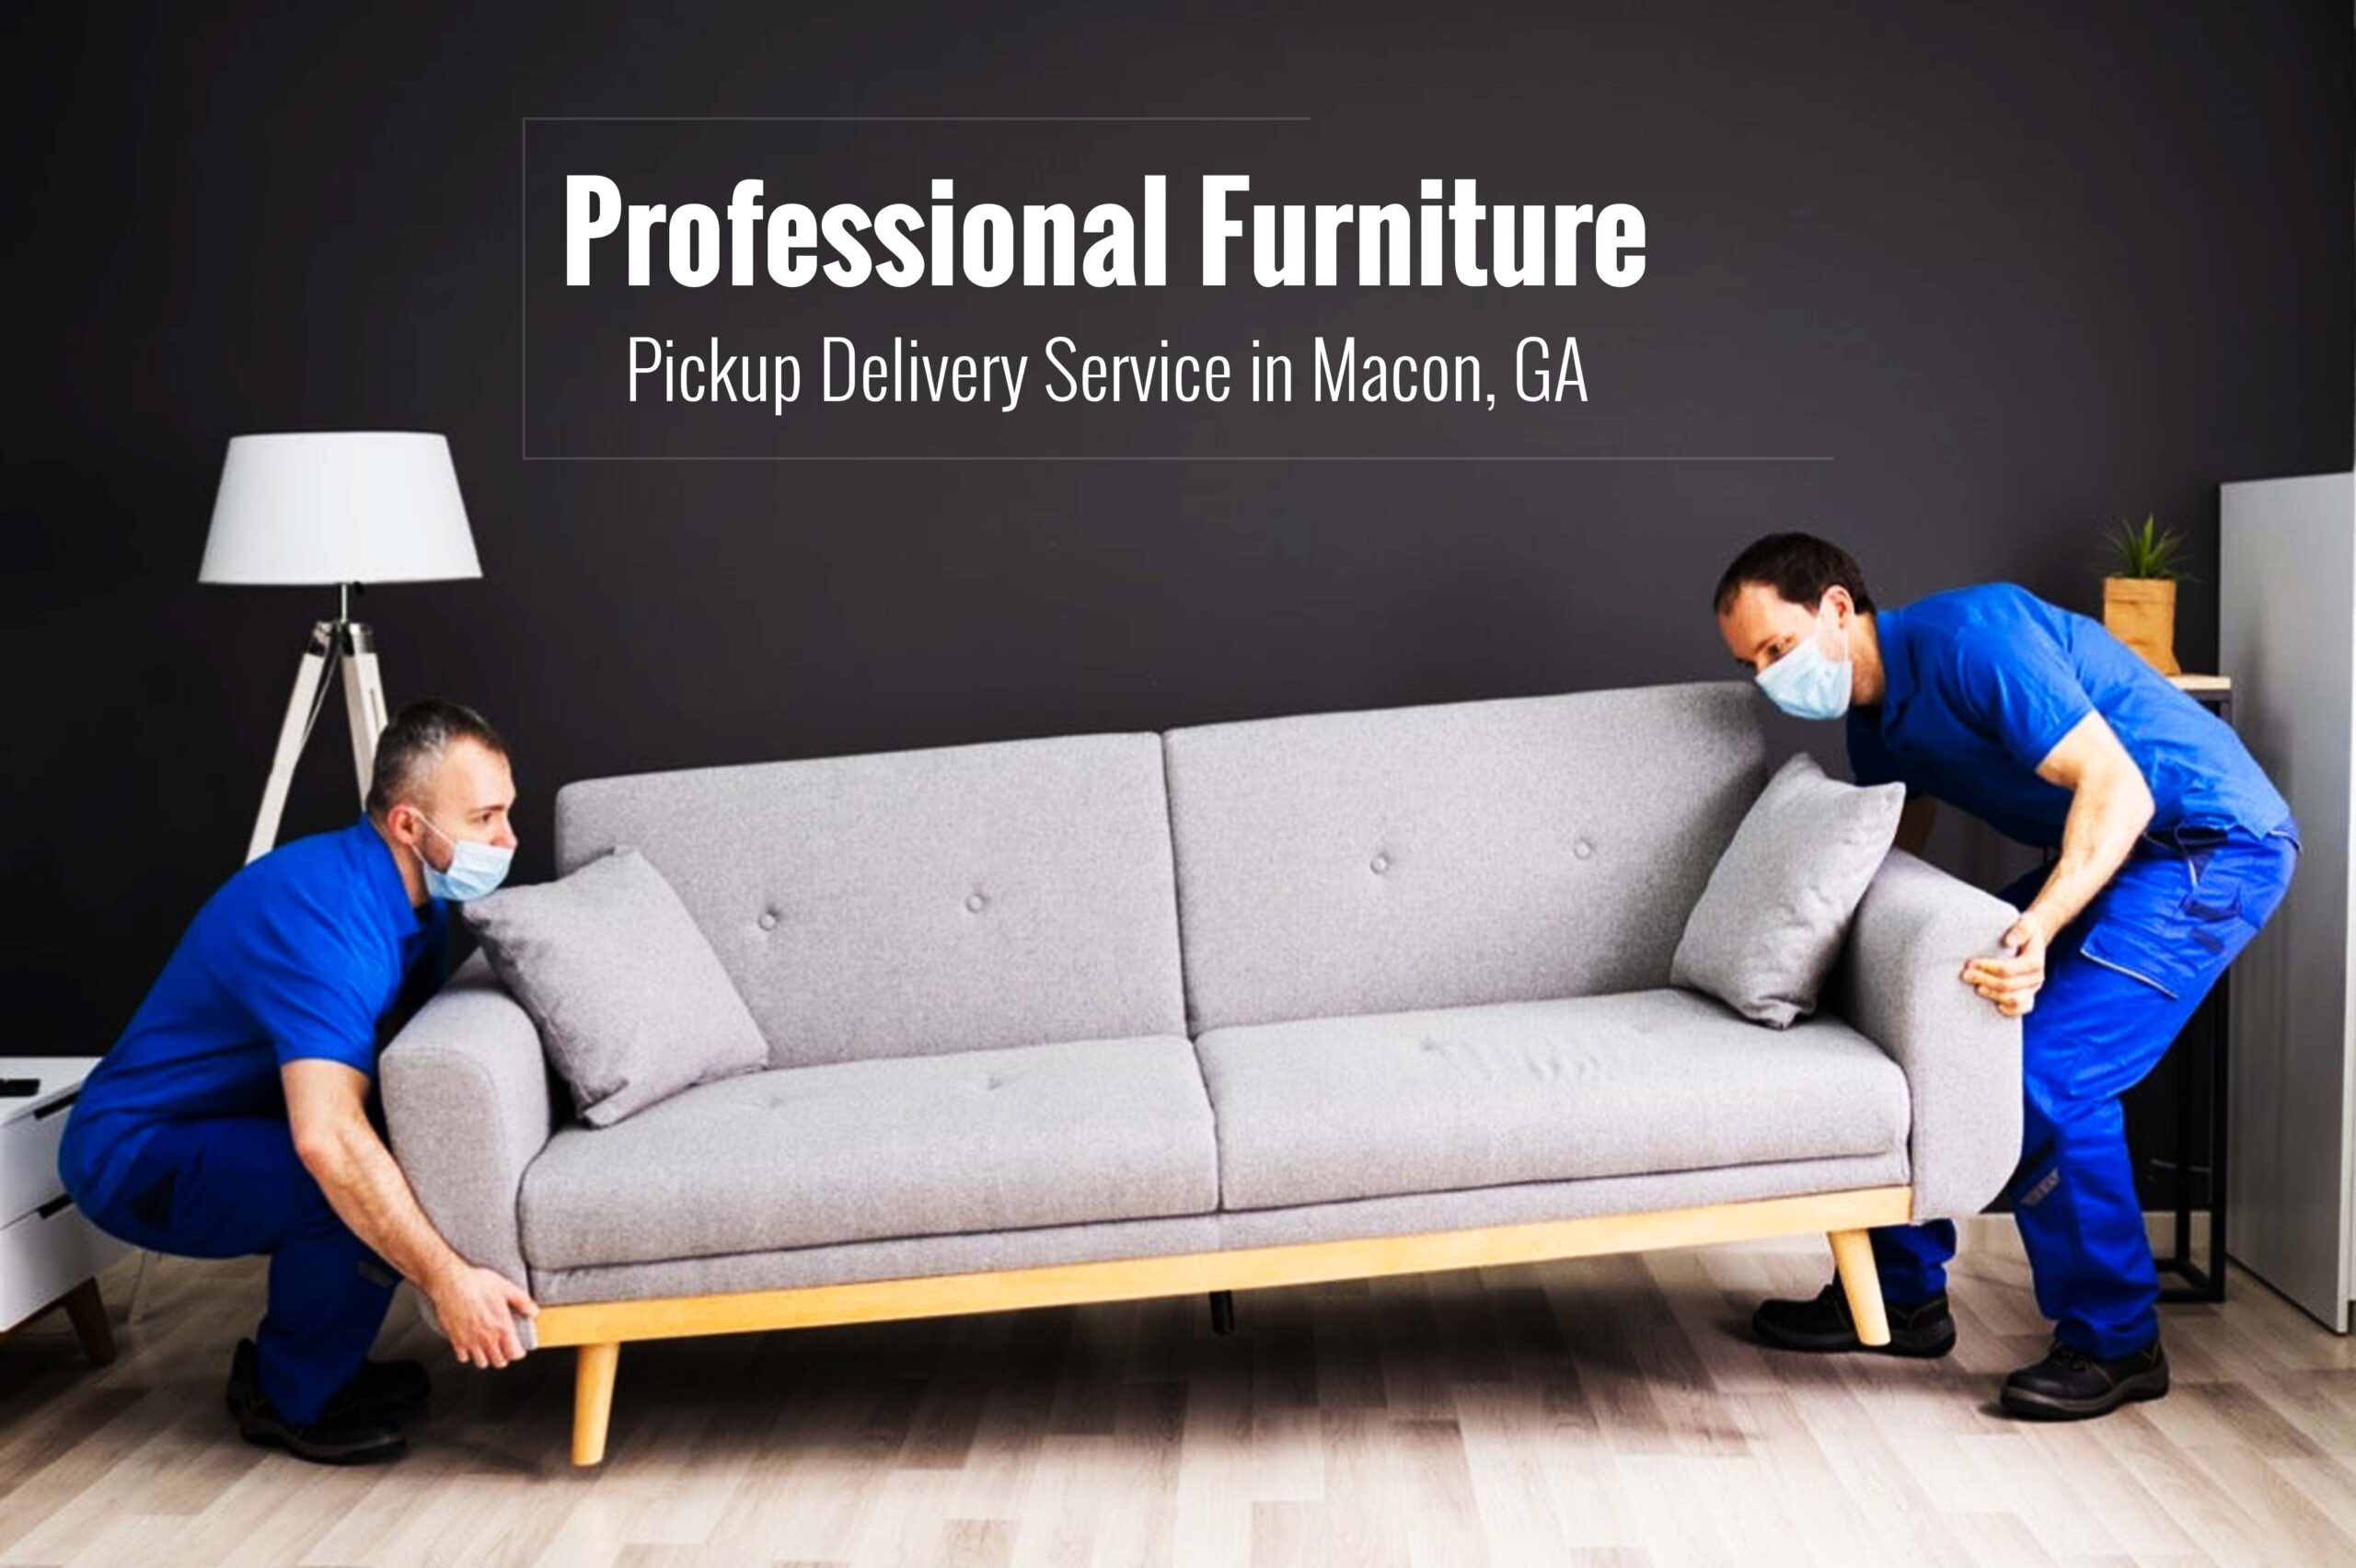 Professional Furniture Pickup Delivery